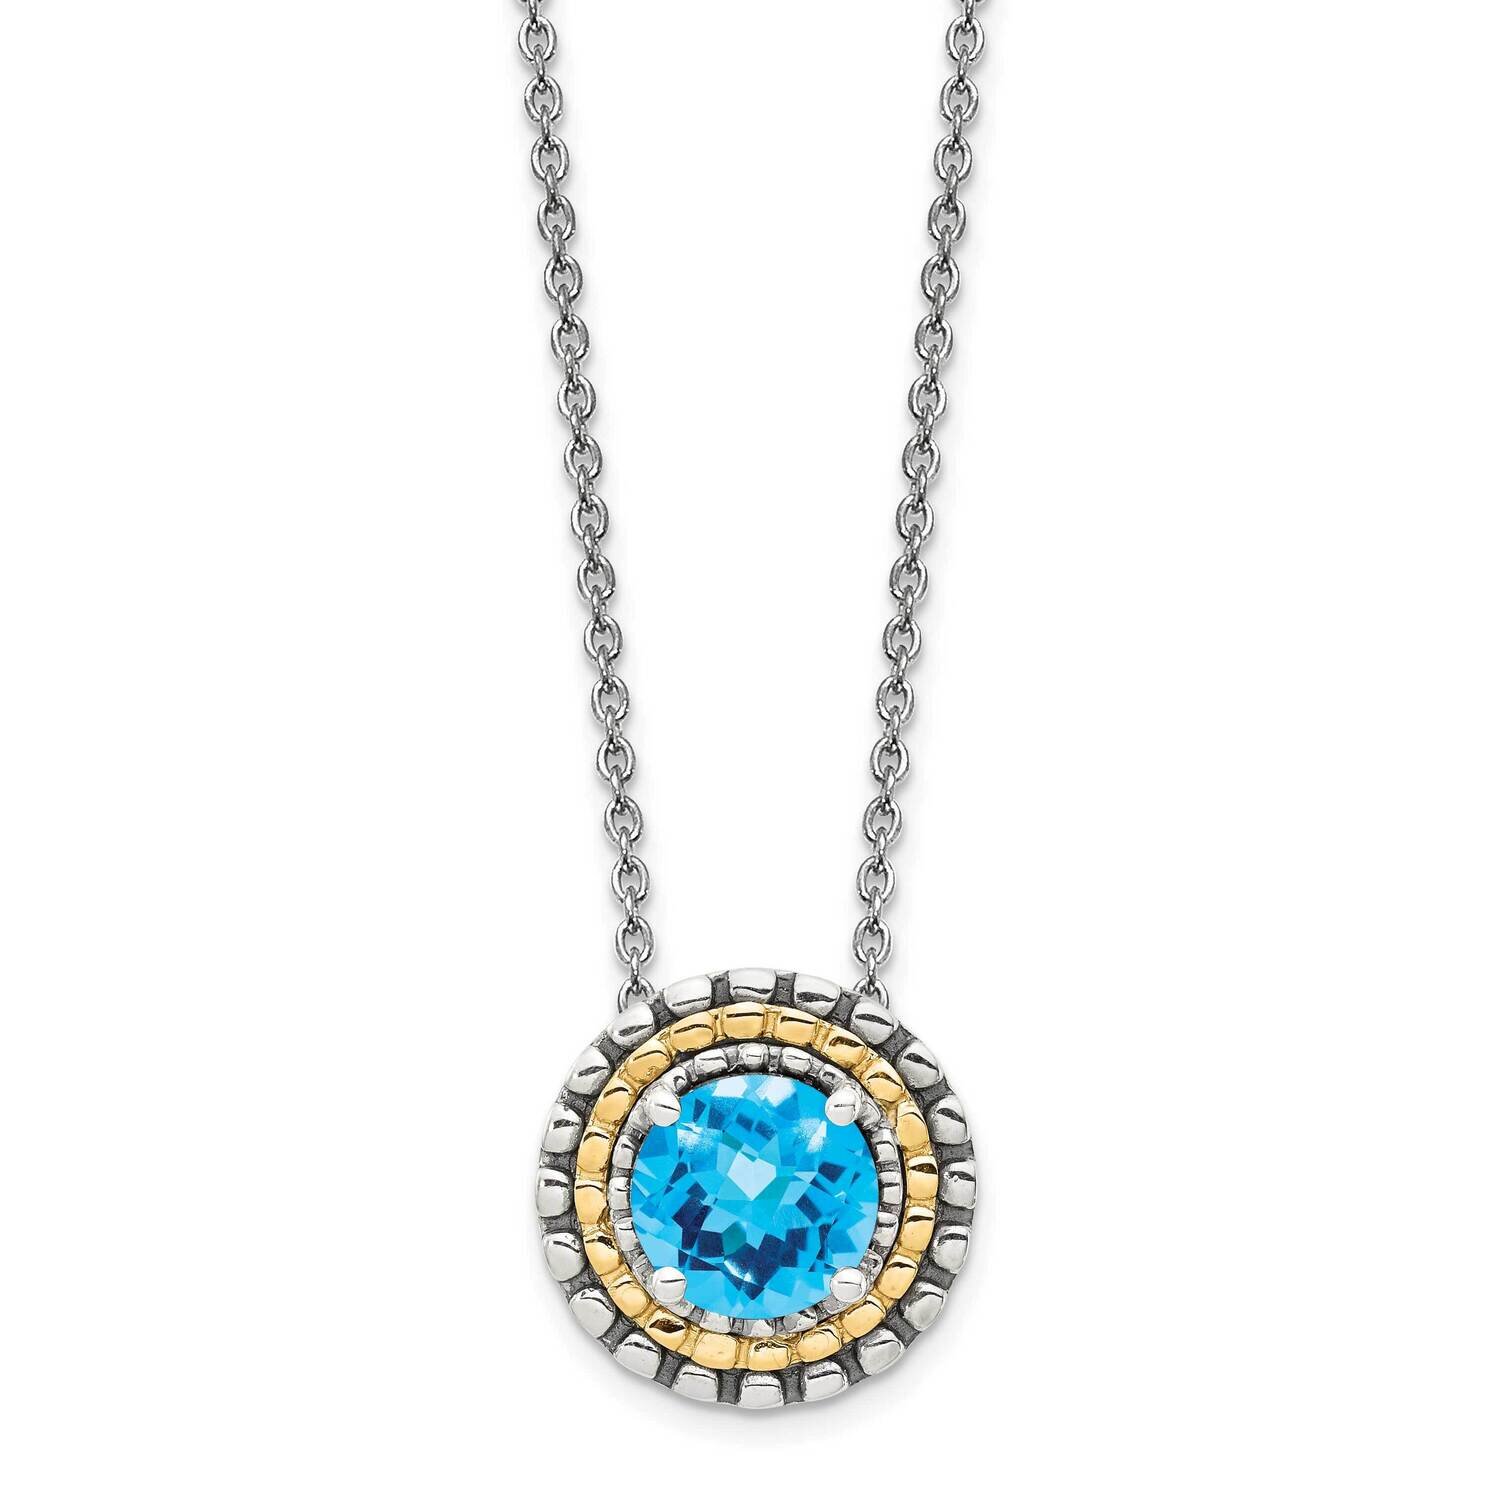 Light Swiss Blue Topaz Round Necklace Sterling Silver with 14k Gold Accent QTC1627